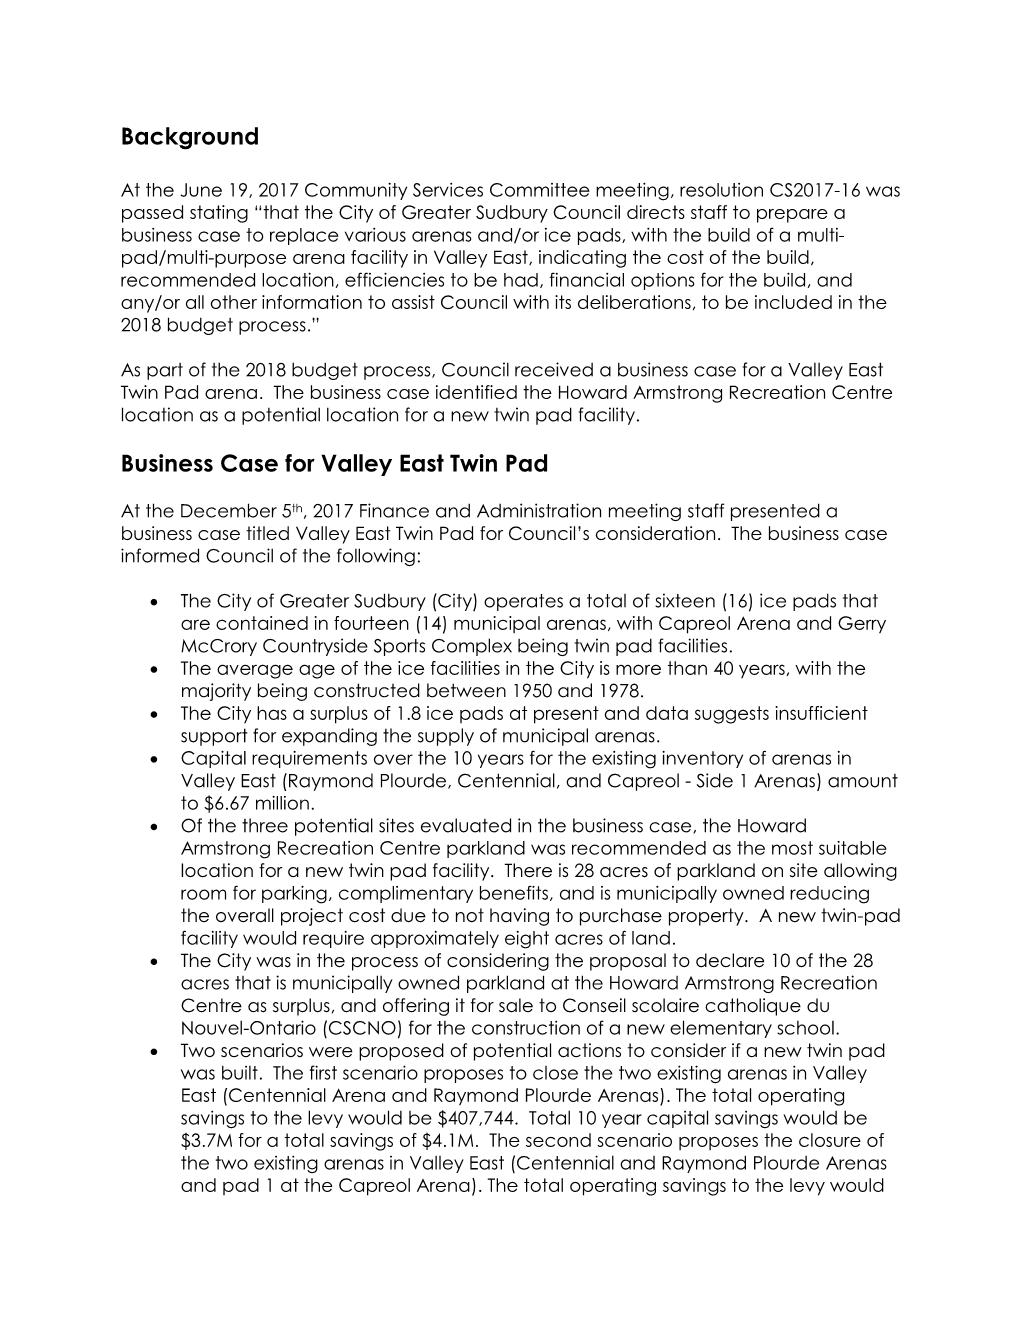 Background Business Case for Valley East Twin